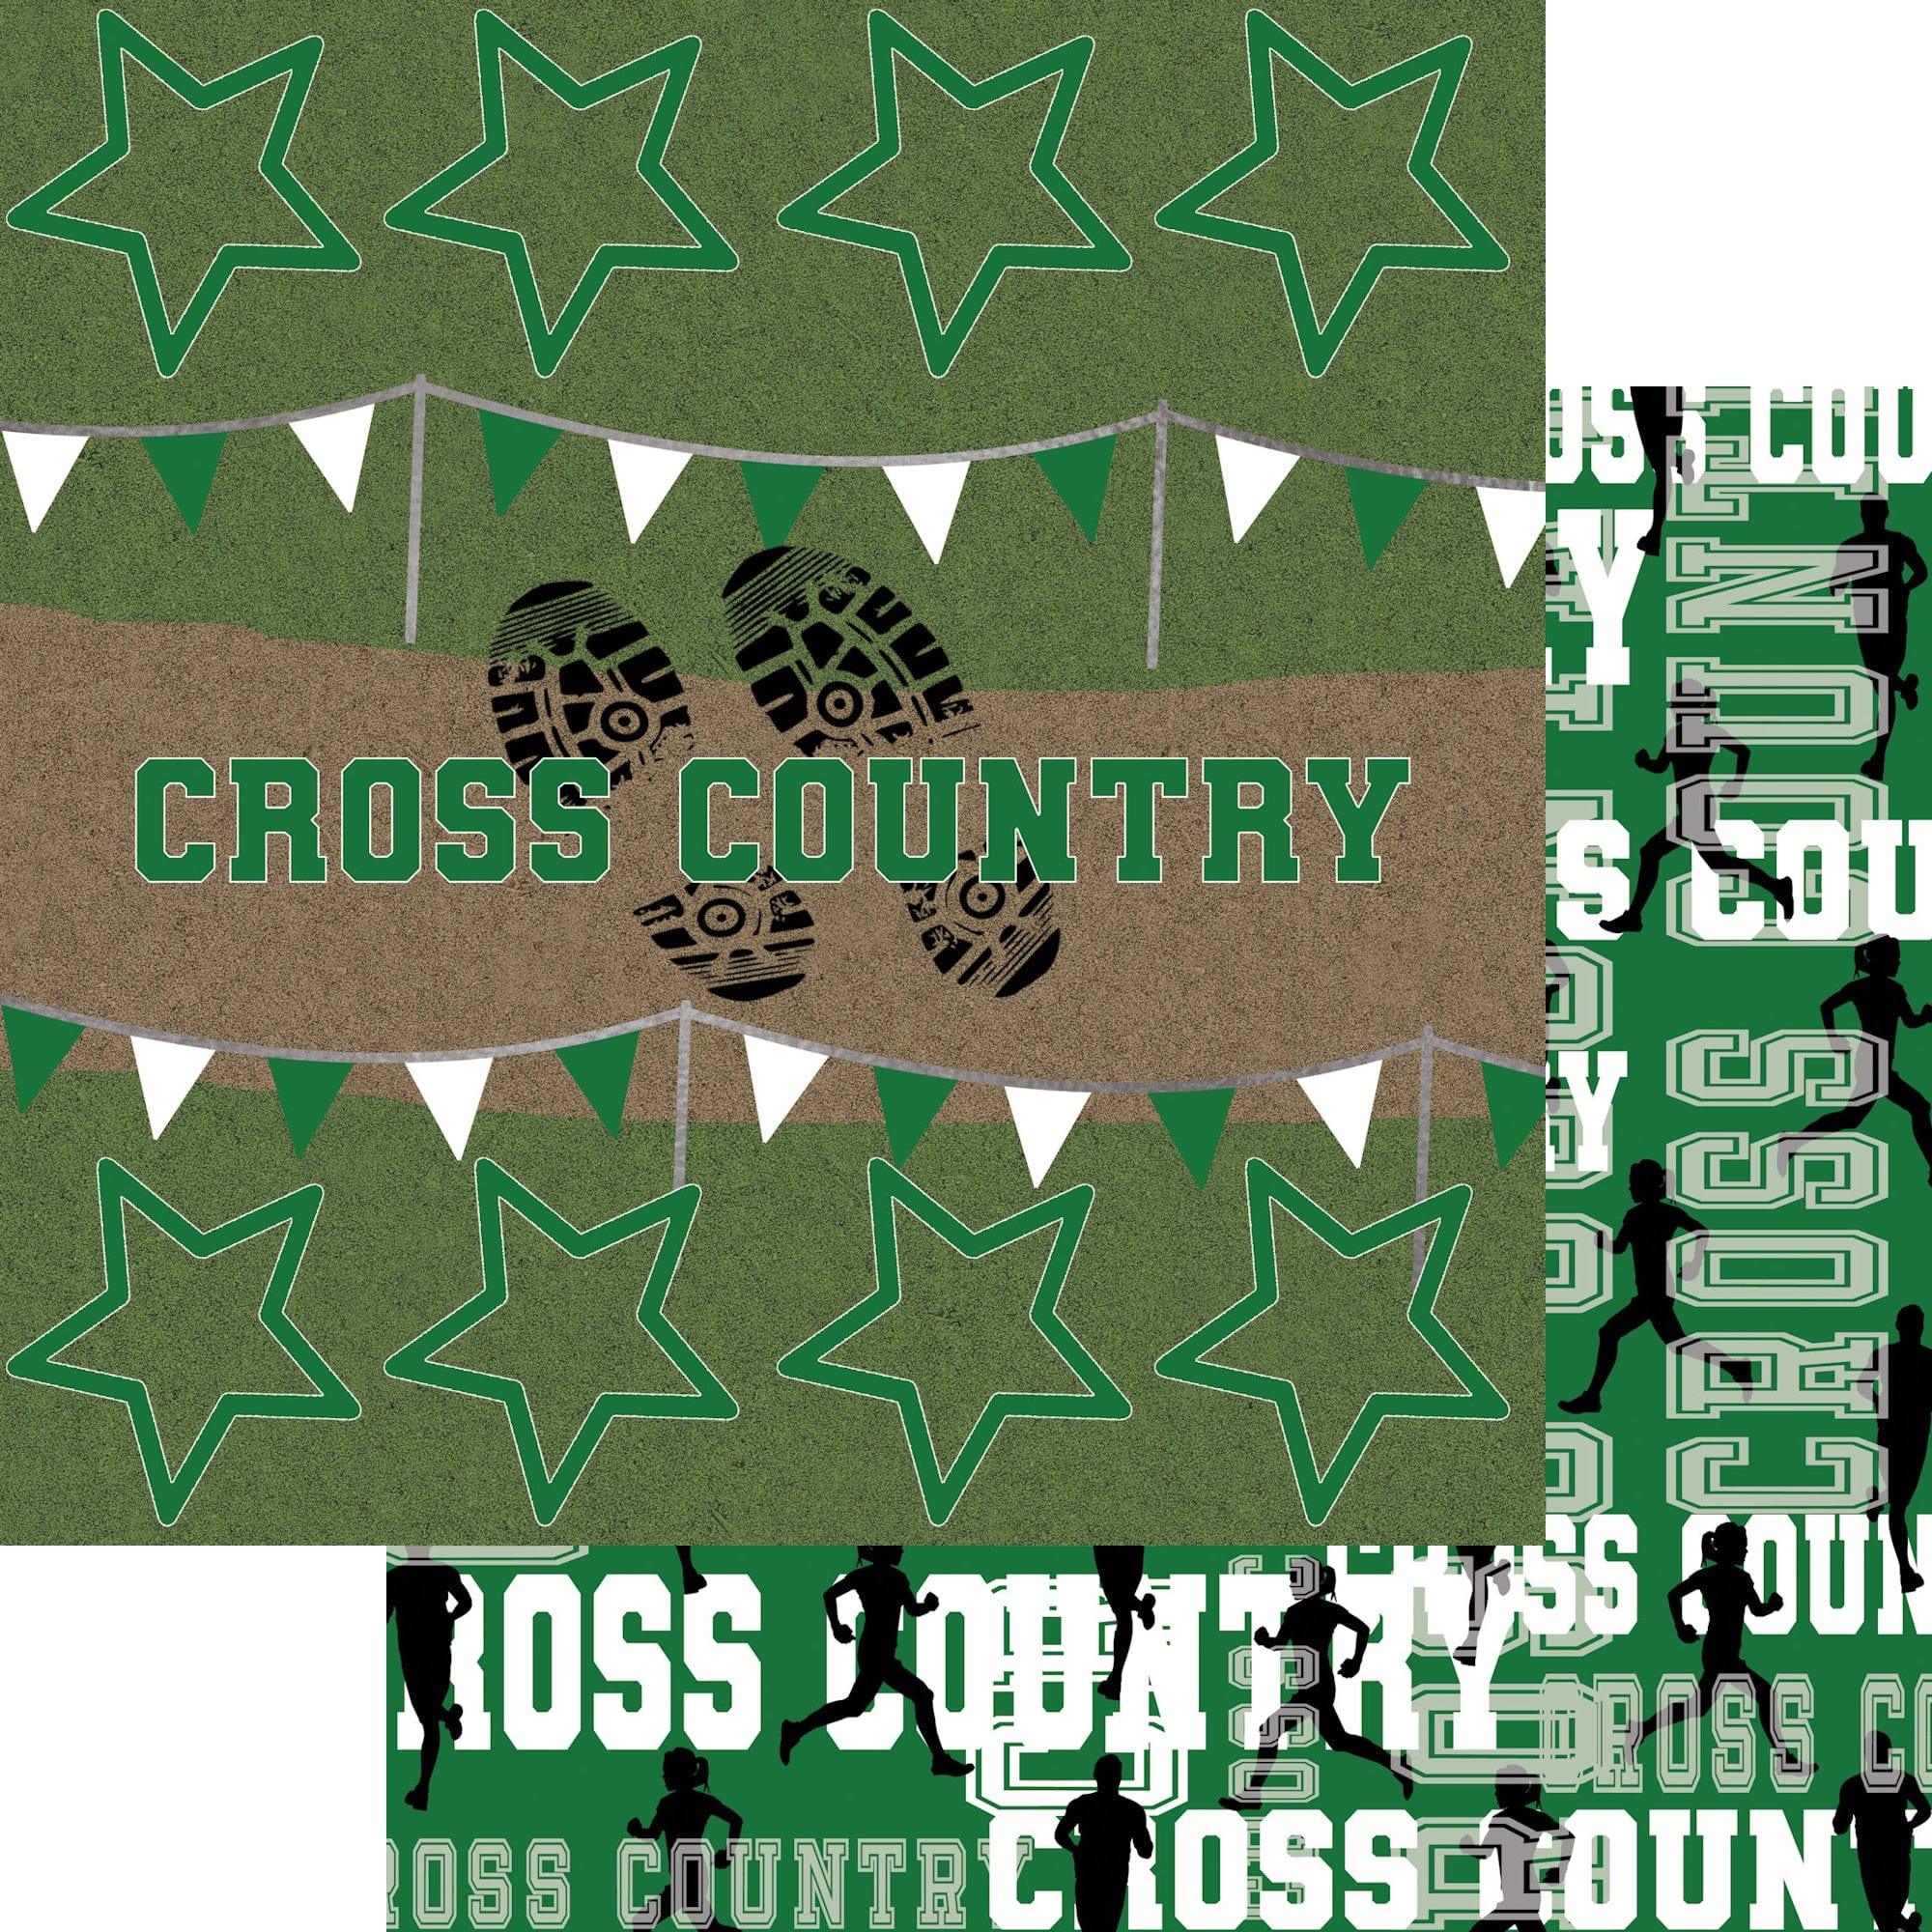 Cross Country Collection Cross Country 12 x 12 Double-Sided Scrapbook Paper by SSC Designs - Scrapbook Supply Companies